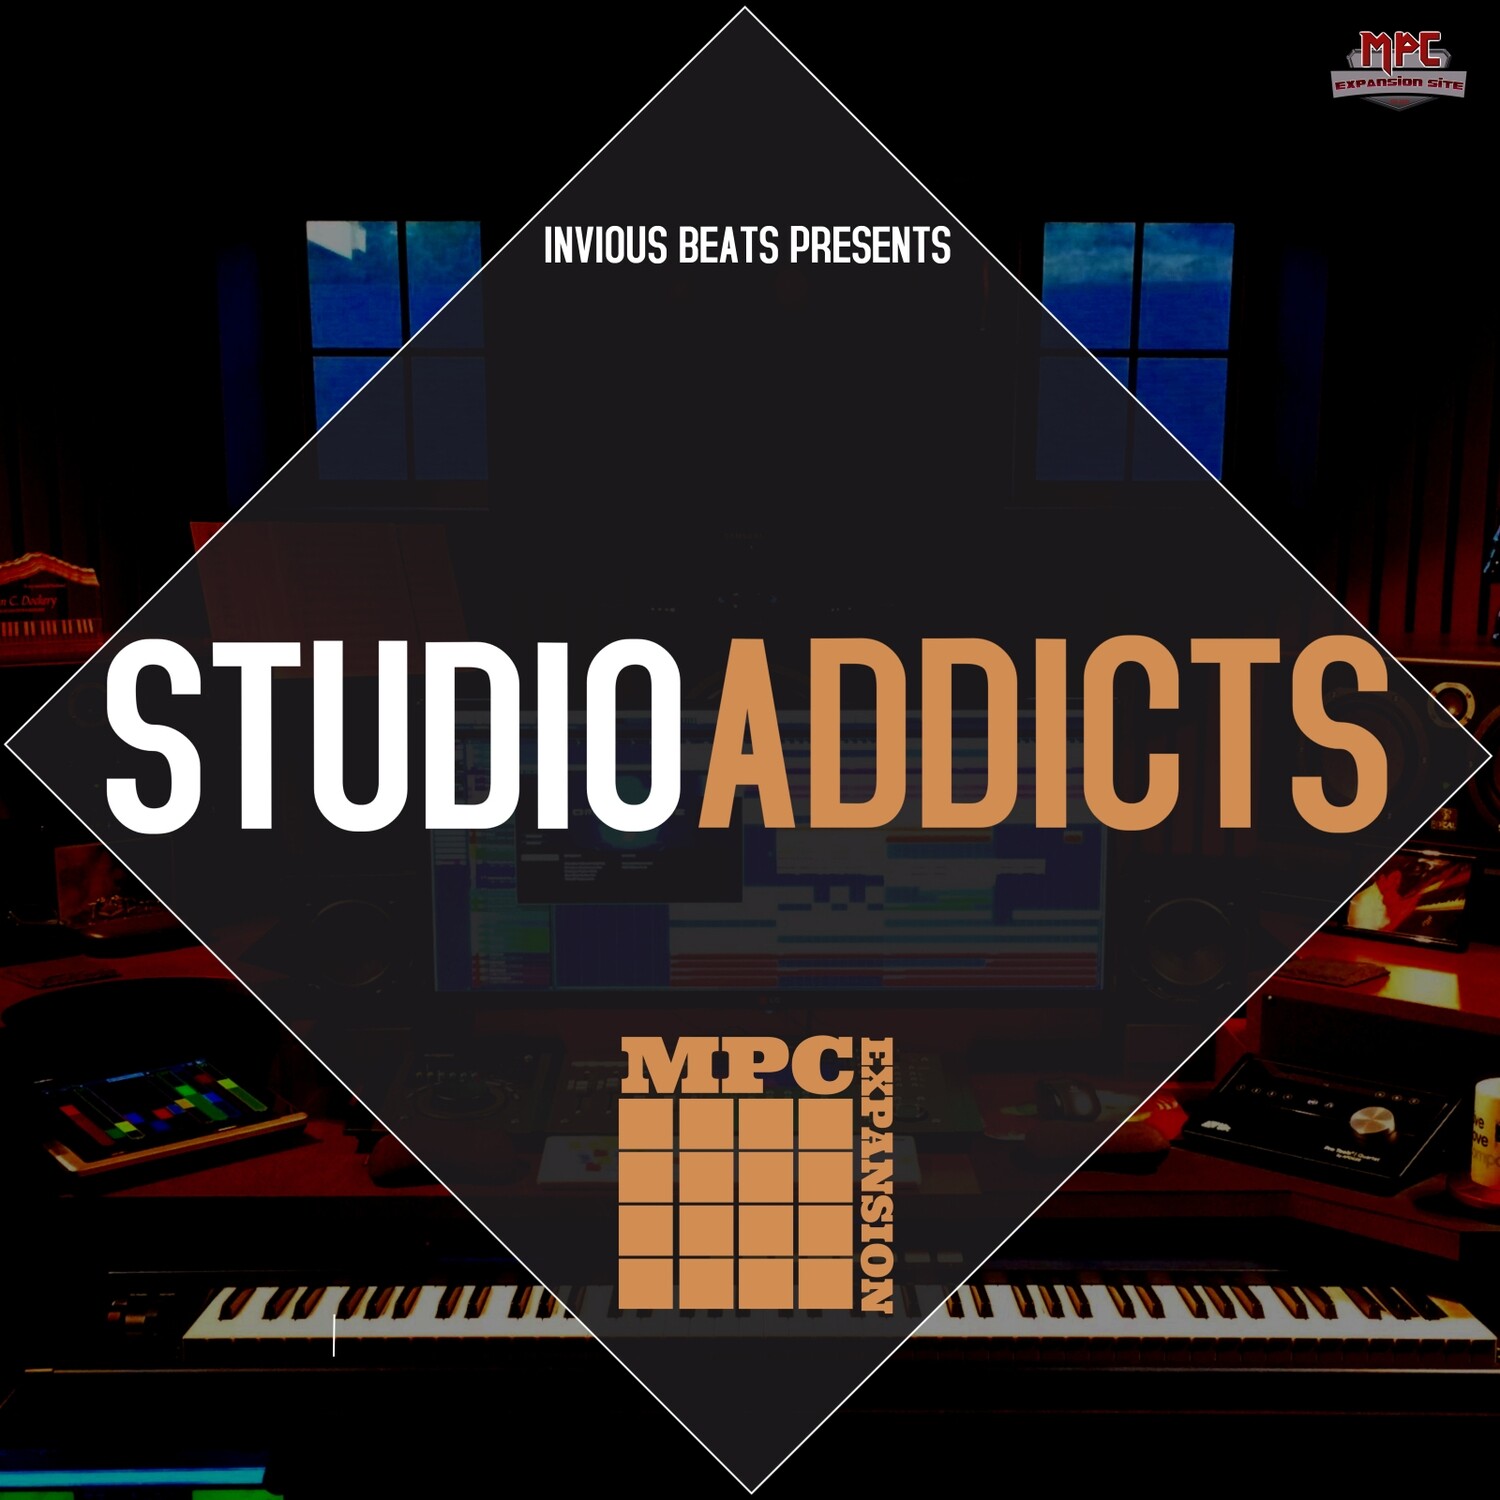 MPC EXPANSION 'STUDIO ADDICTS' by INVIOUS